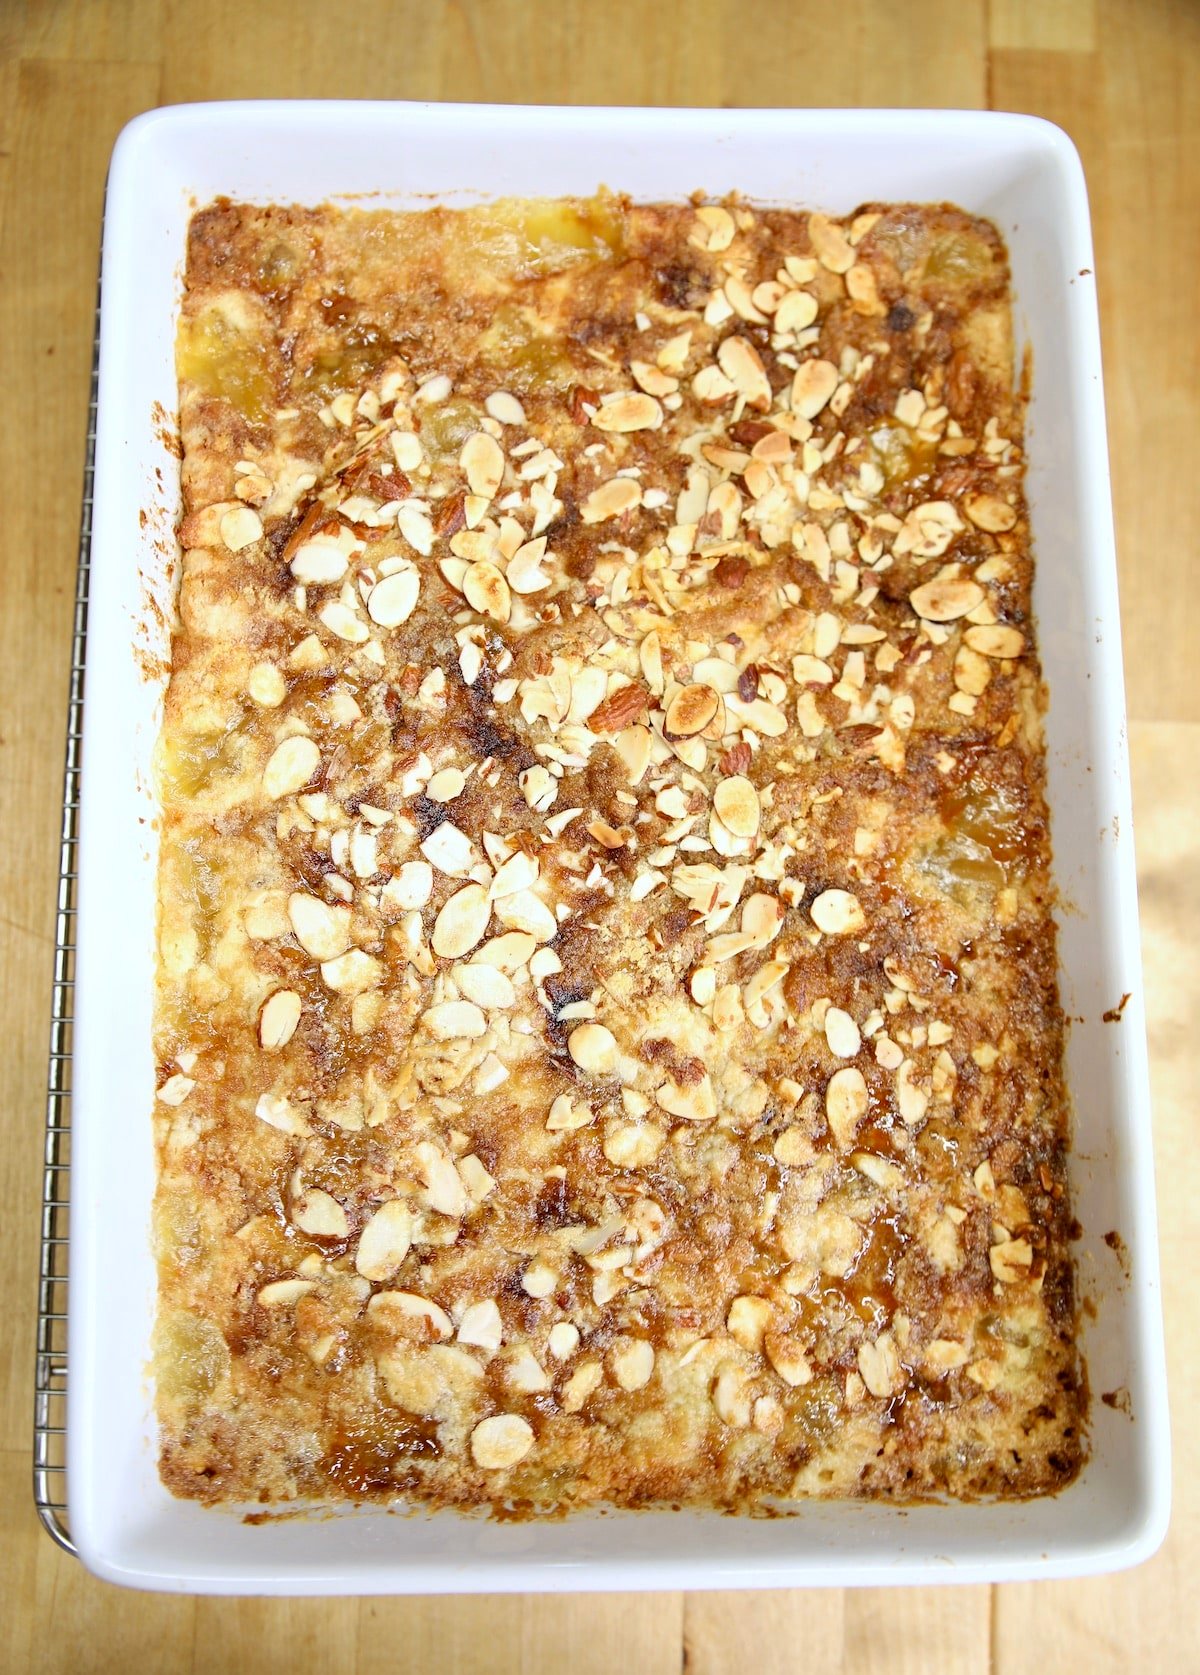 Pan of apricot dump cake with almonds.